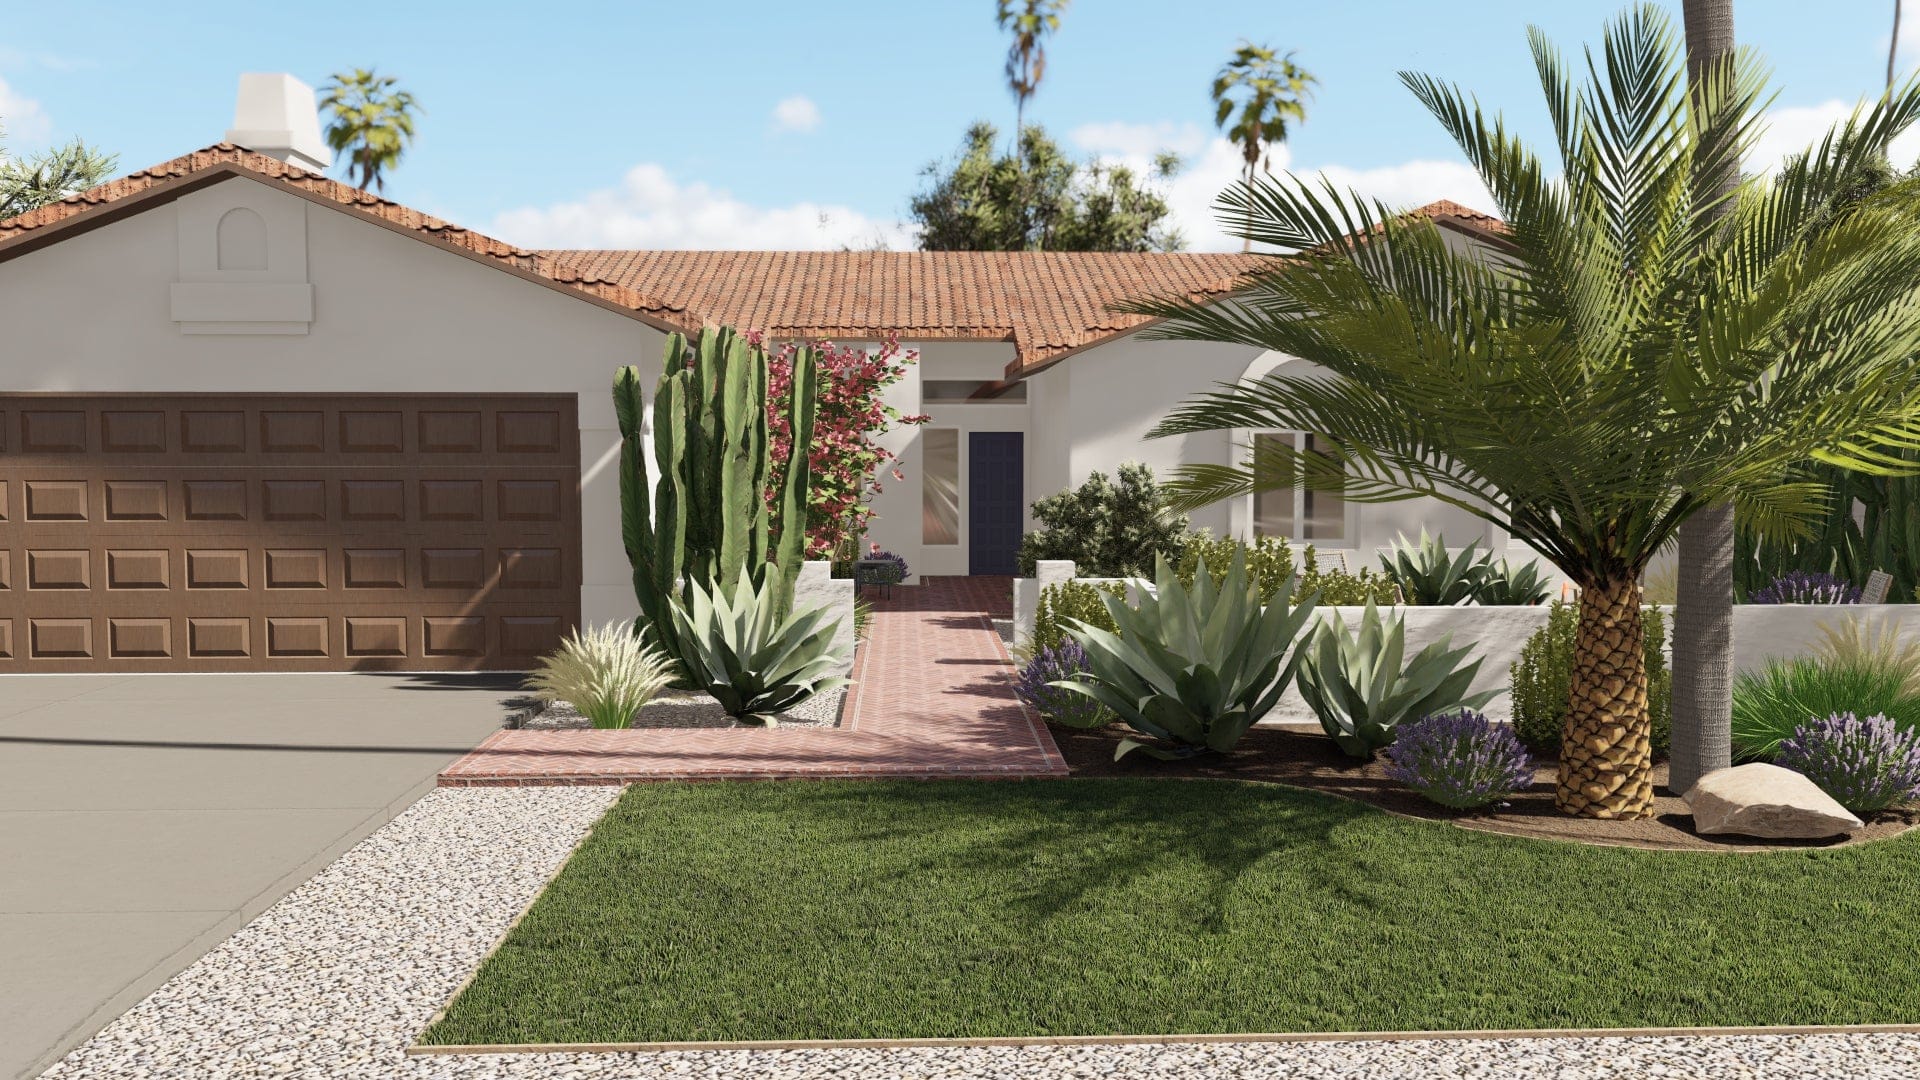 3D render of front yard design with large succulent garden and walled patio